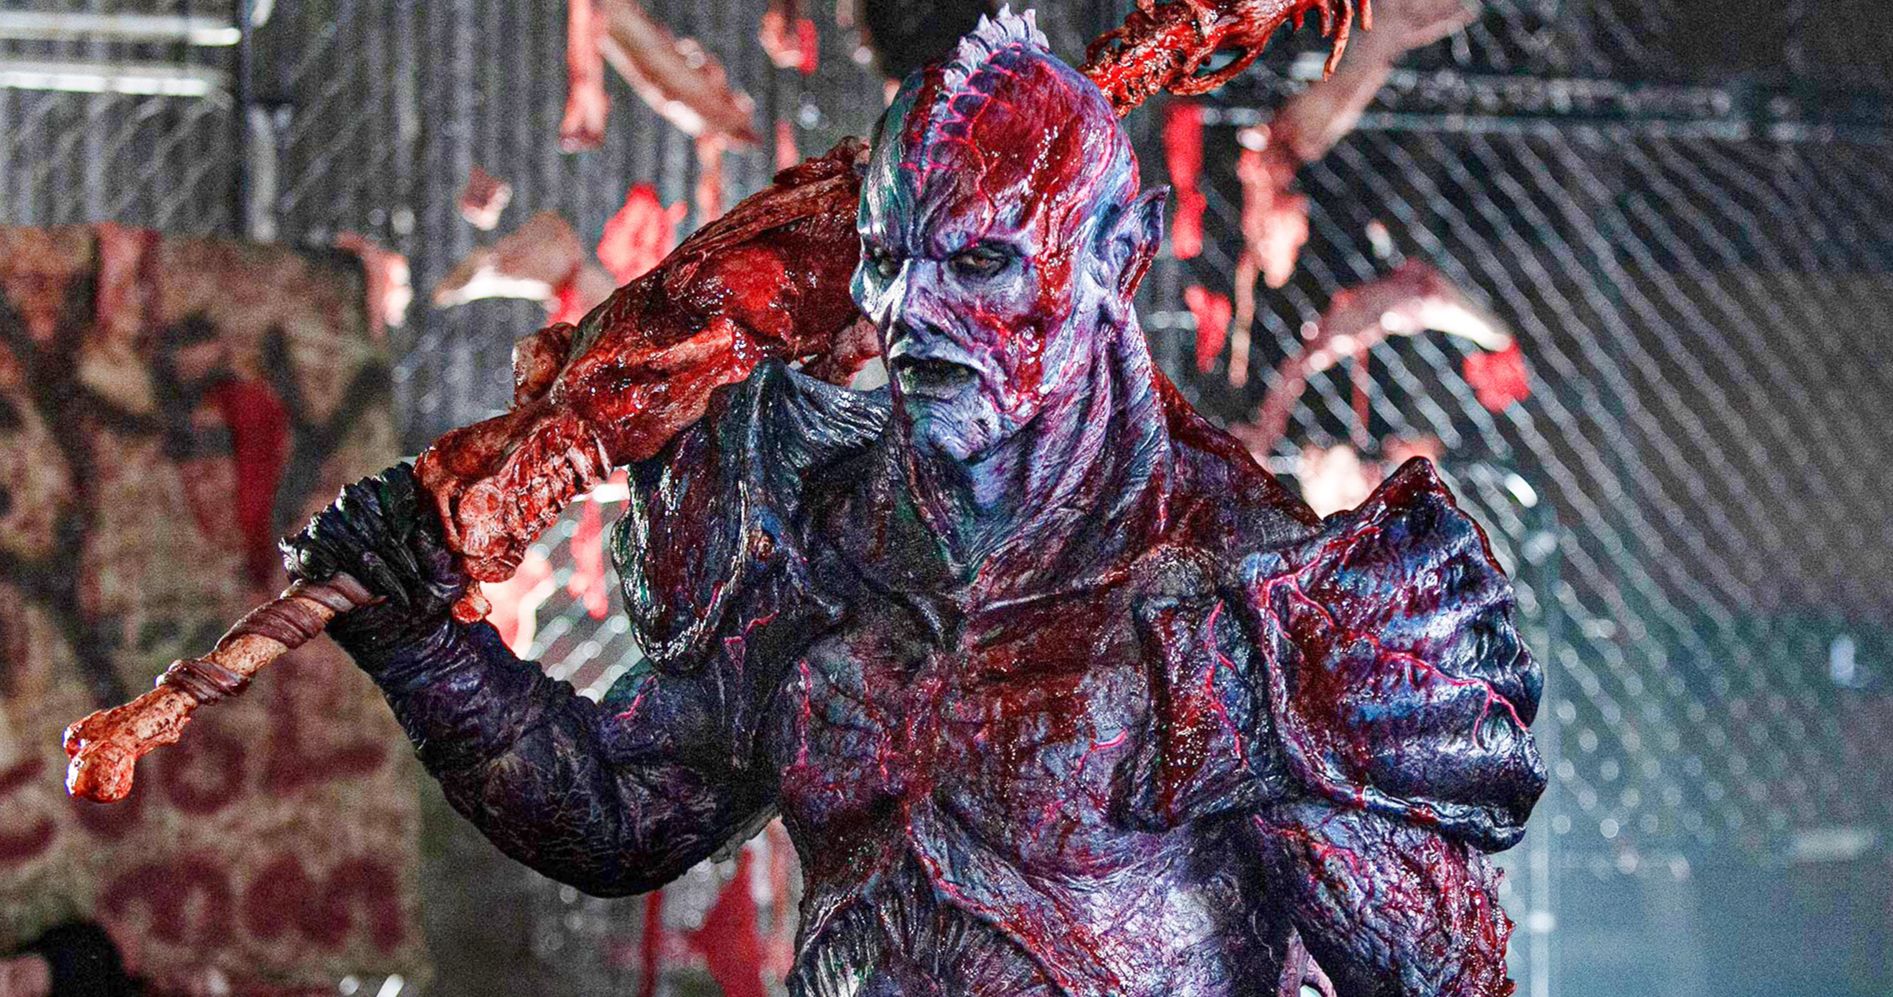 Psycho Goreman 2 Is Being Worked On, But Making It Is 'Surprisingly Complicated'